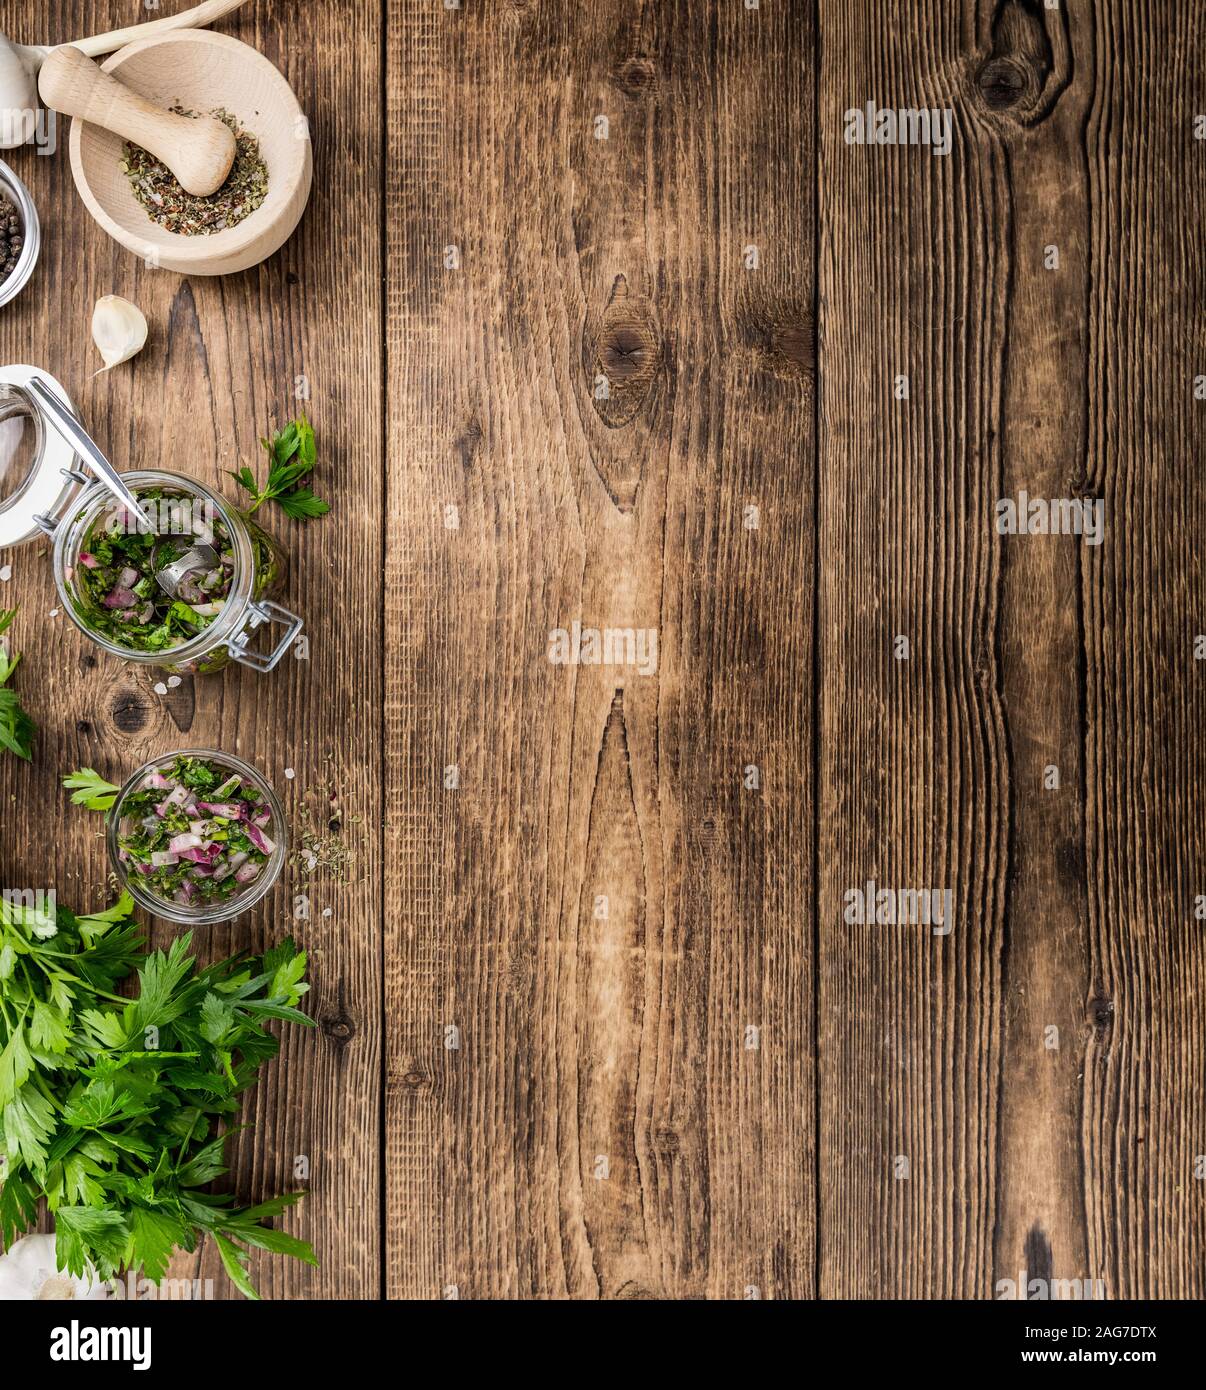 Healthy homemade Chimichurri on a wooden table as detailed close-up shot (selective focus) Stock Photo